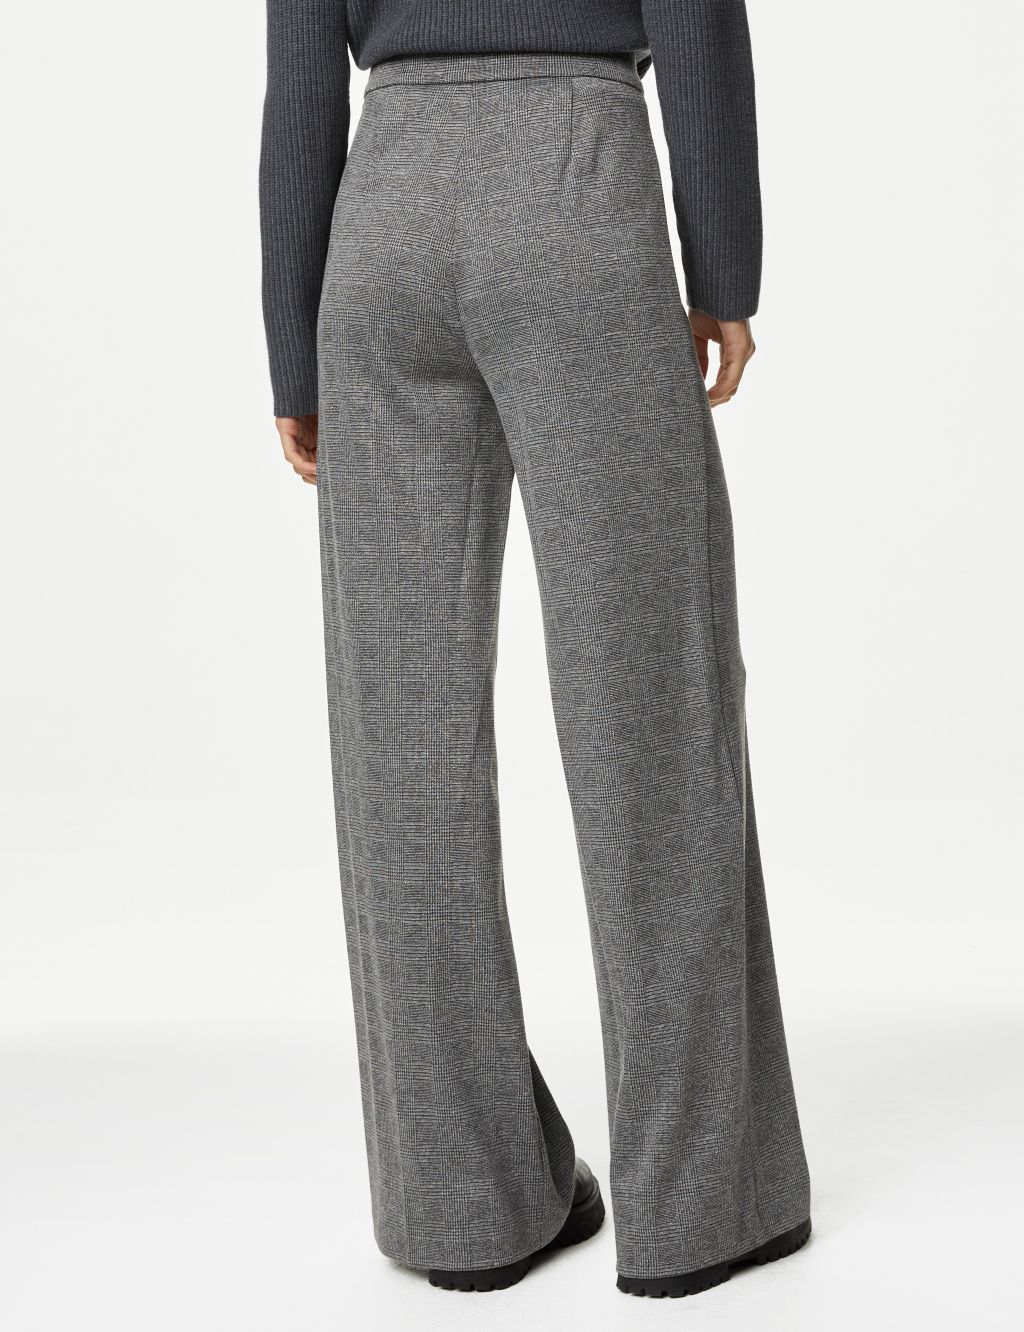 Jersey Checked Wide Leg Trousers image 5